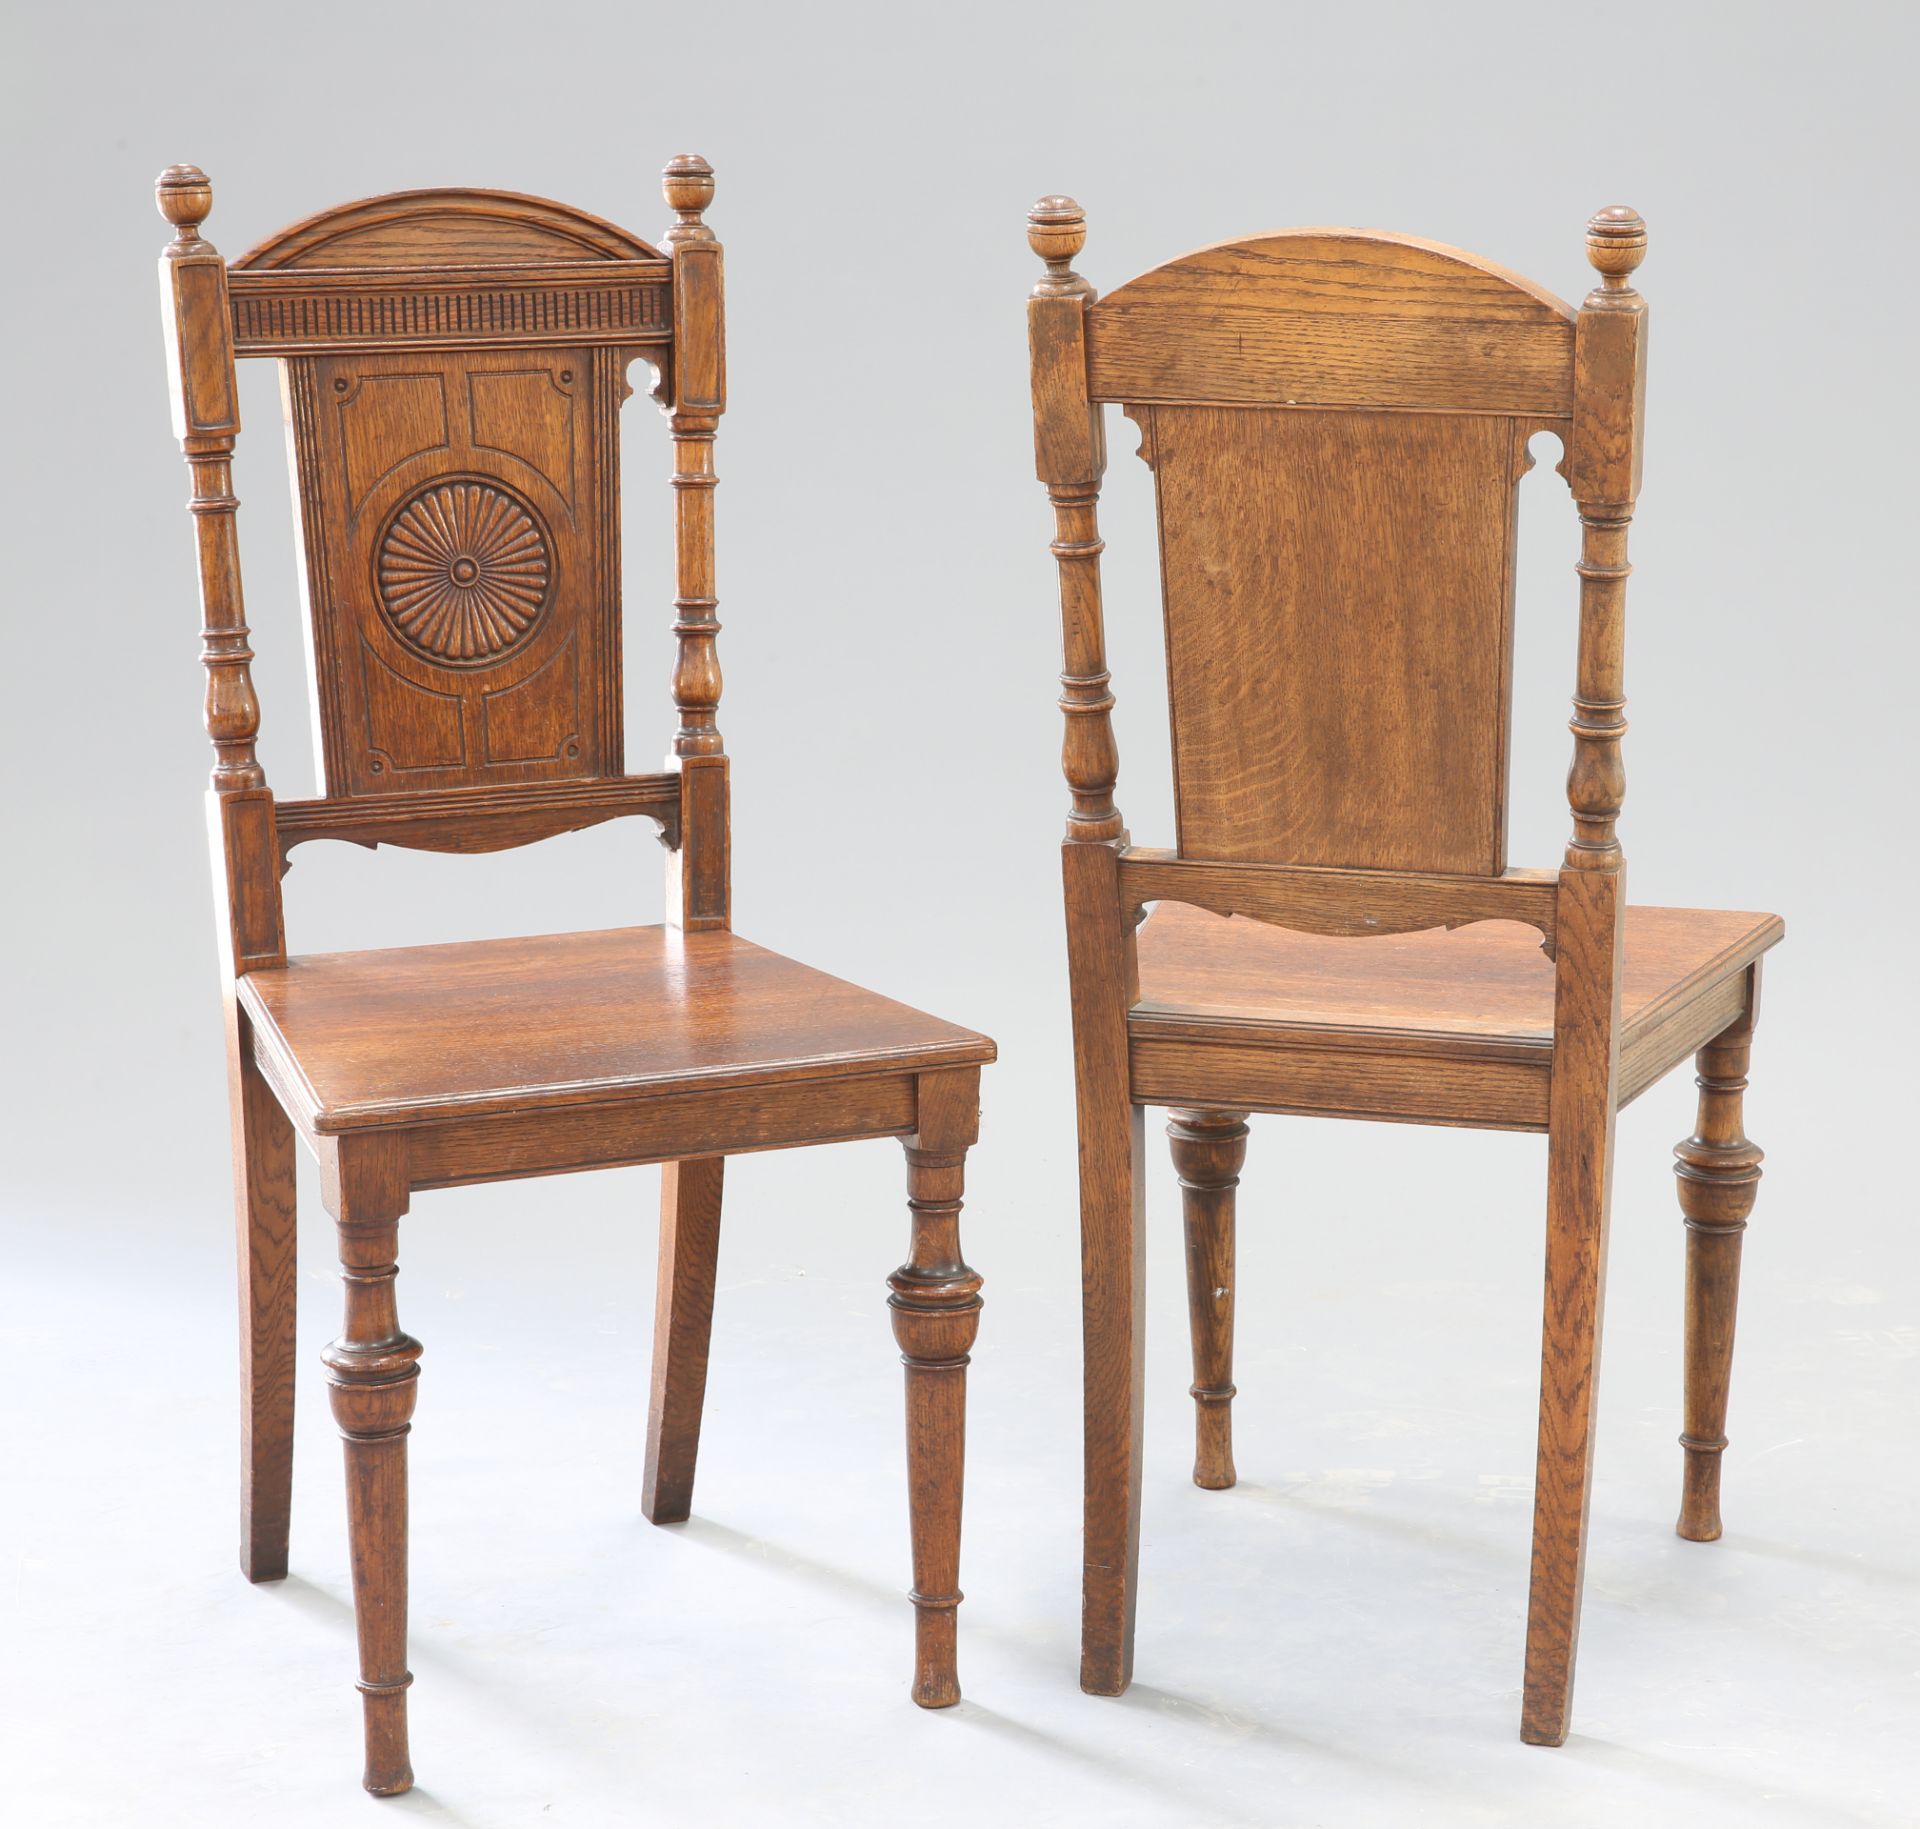 A PAIR OF AESTHETIC MOVEMENT OAK HALL CHAIRS, CIRCA 1880 - Image 2 of 2